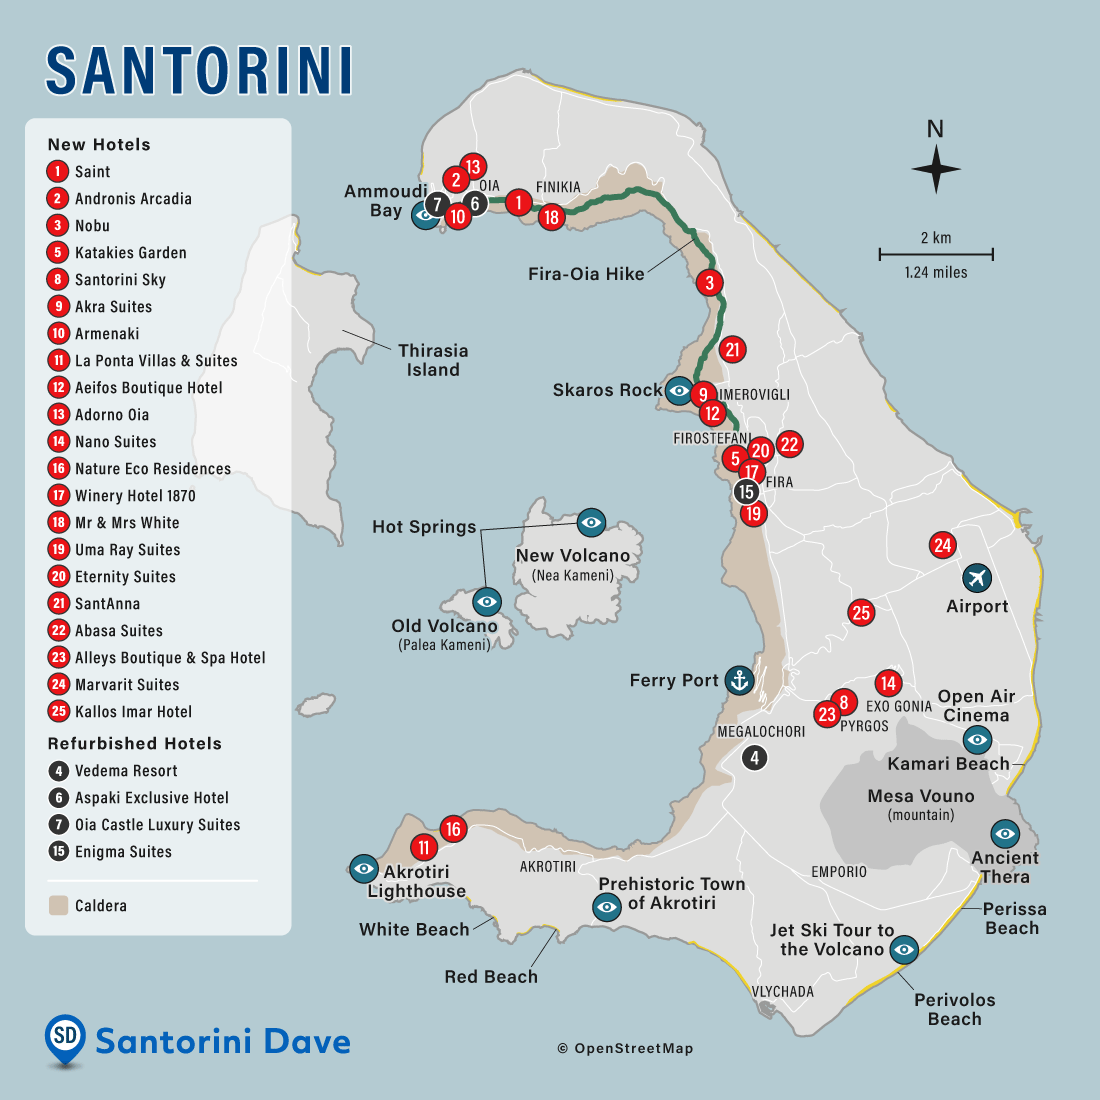 Map showing the locations of the best new hotels on the island of Santorini